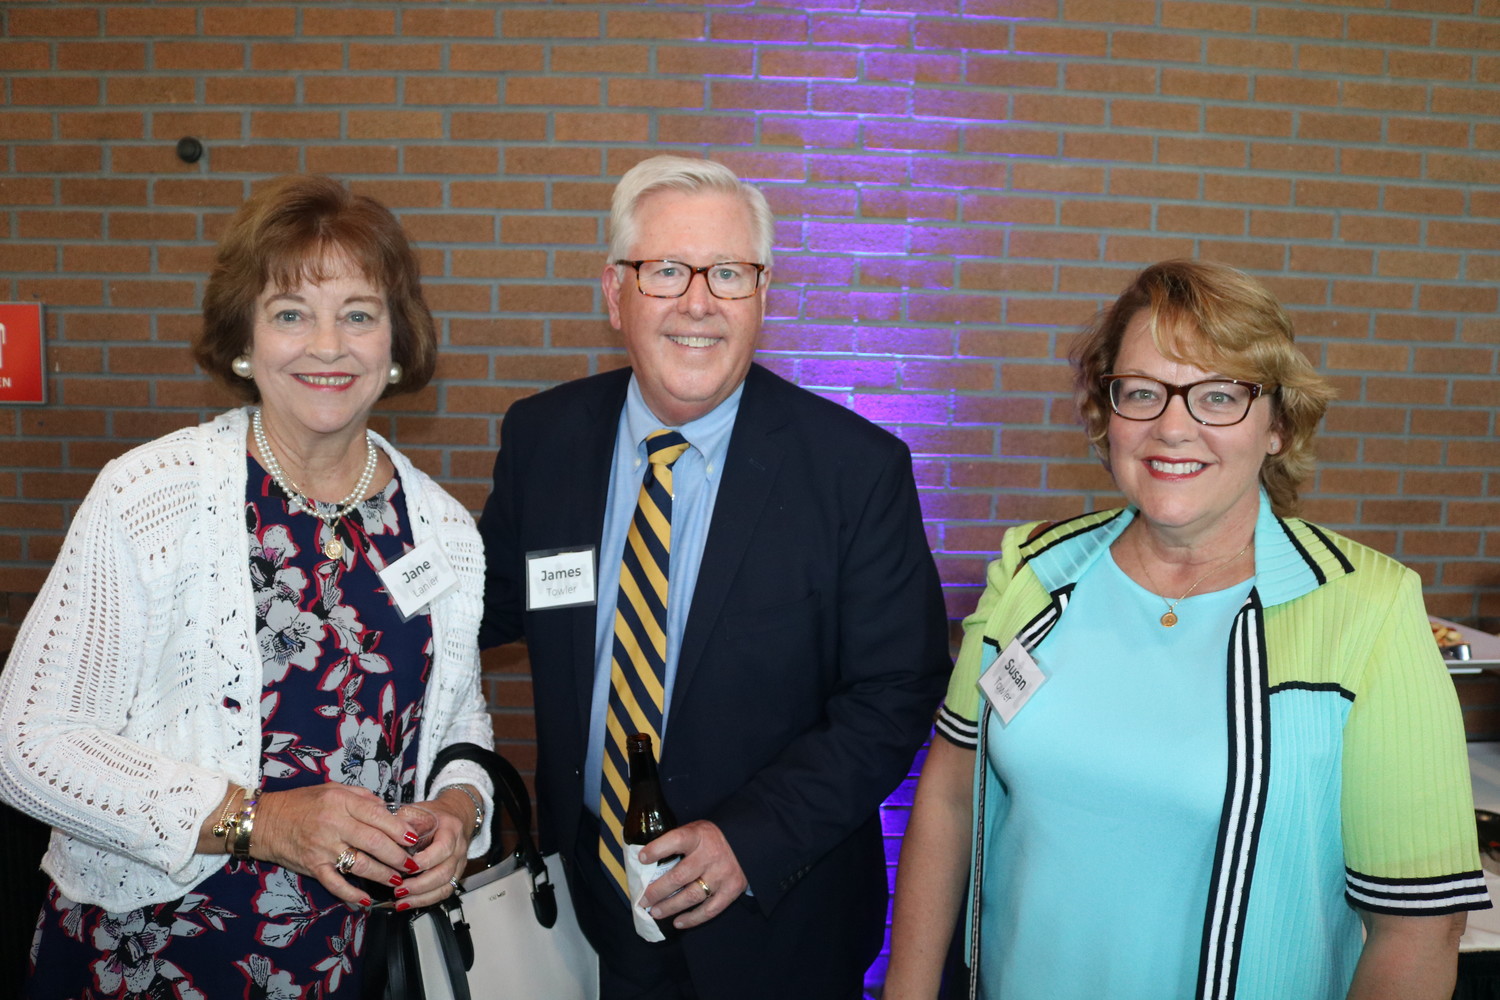 Jane Lanier and James Towler of St. Vincent’s Healthcare and Susan Towler of Florida Blue